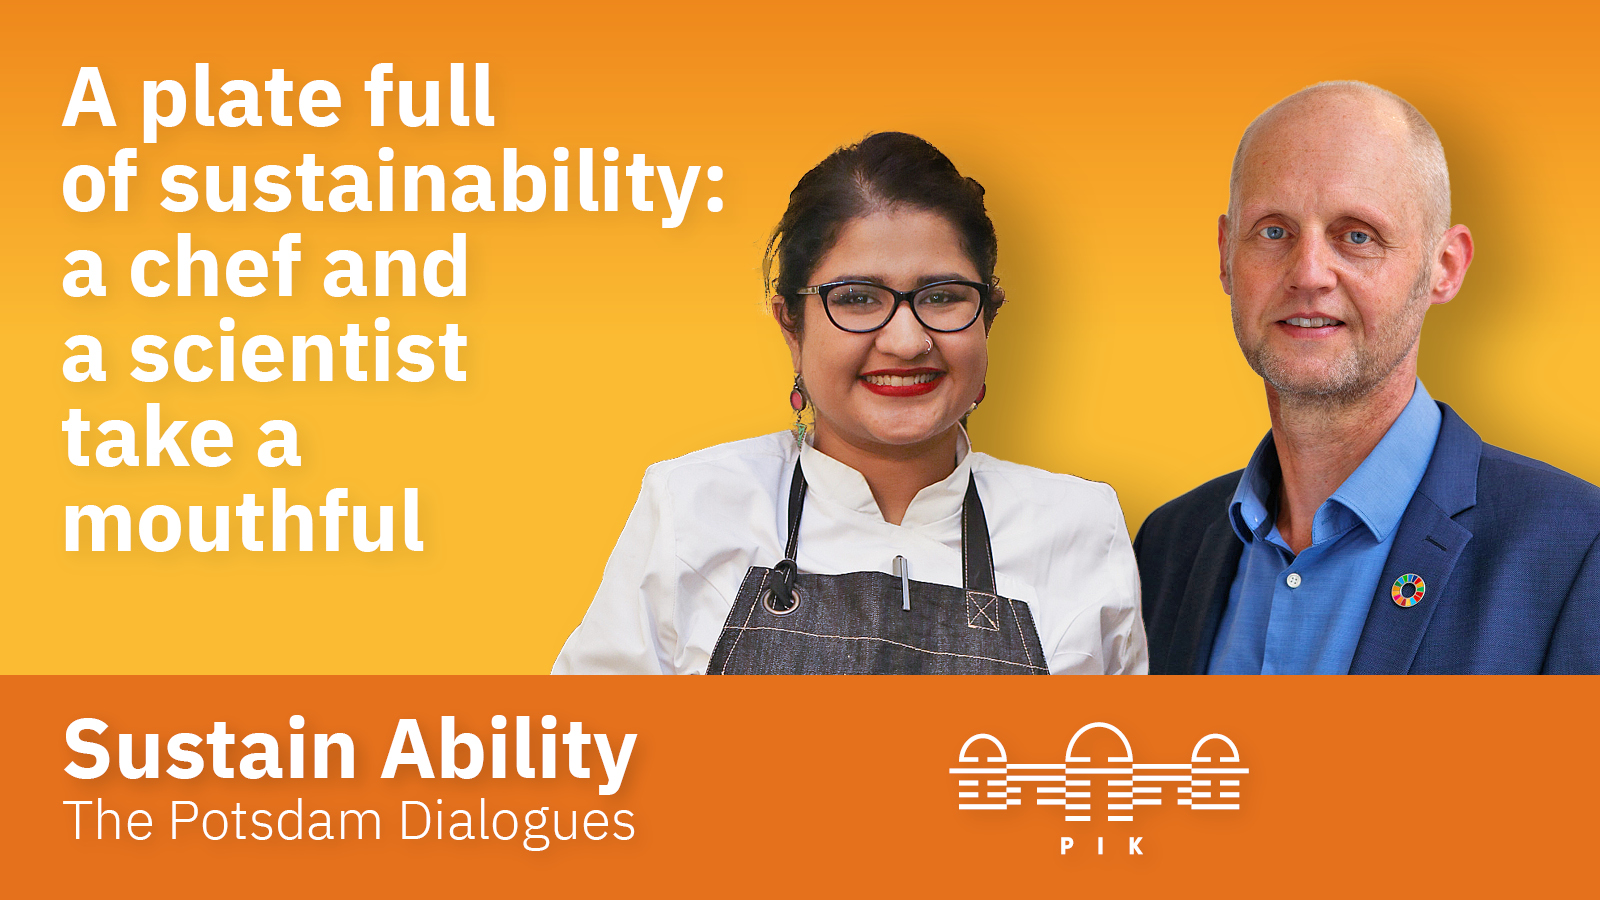 Sustain Ability. The Potsdam Dialogues - Science for a Safe Tomorrow. Episode 3: A plate full of sustainability